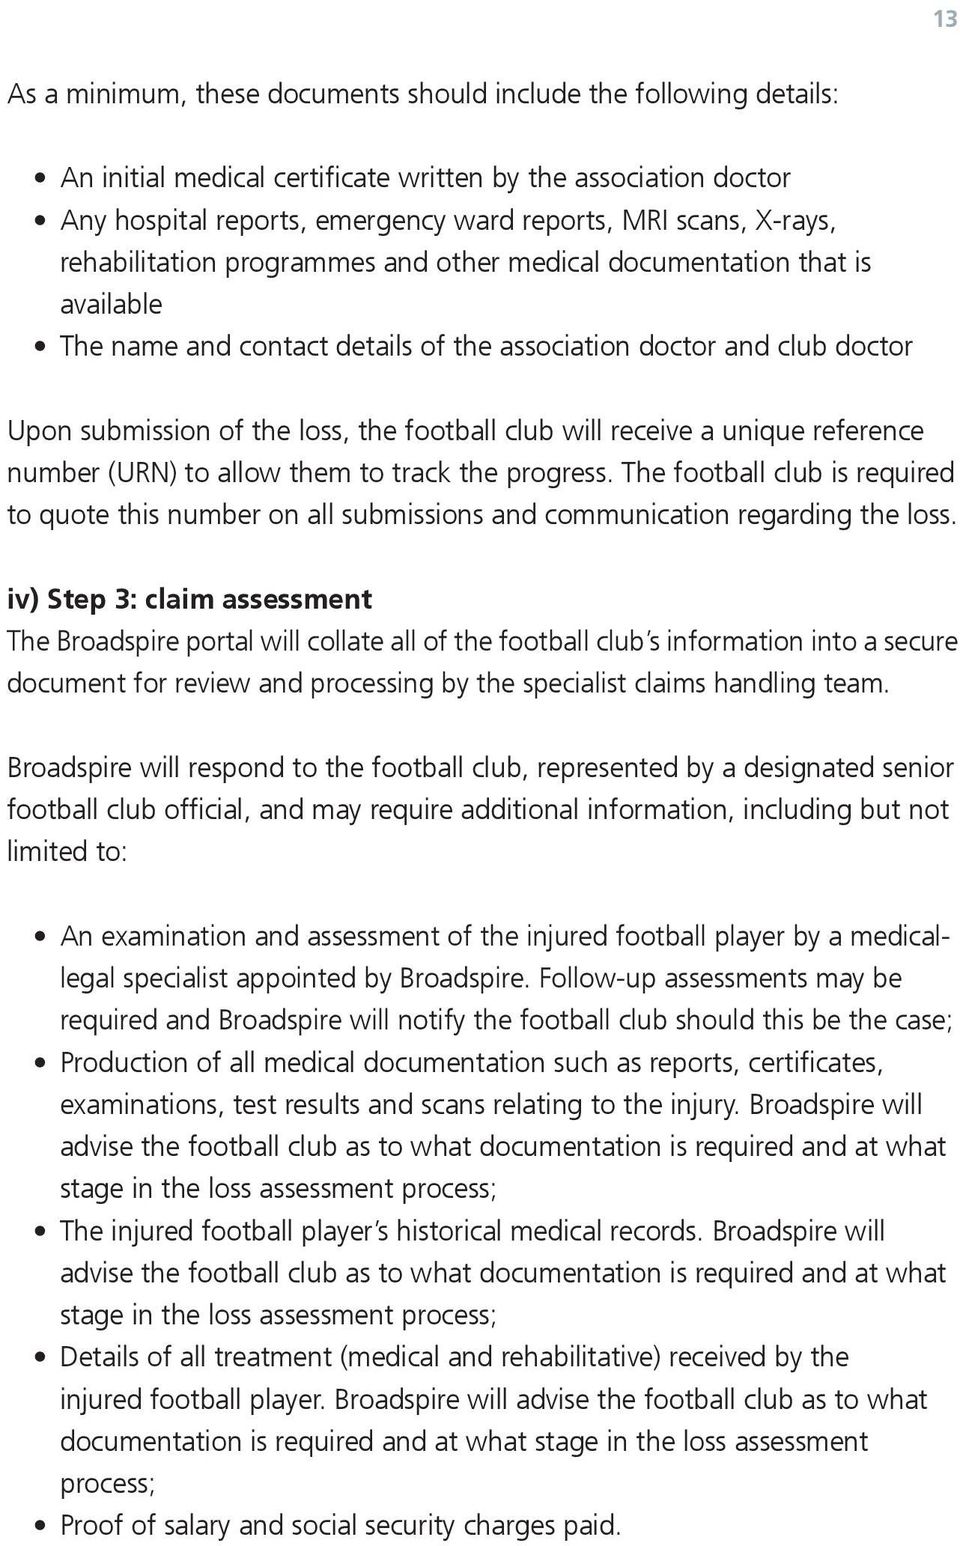 (URN) to allow m to track progress. The football club is required to quote this number on all submissions communication regarding loss.